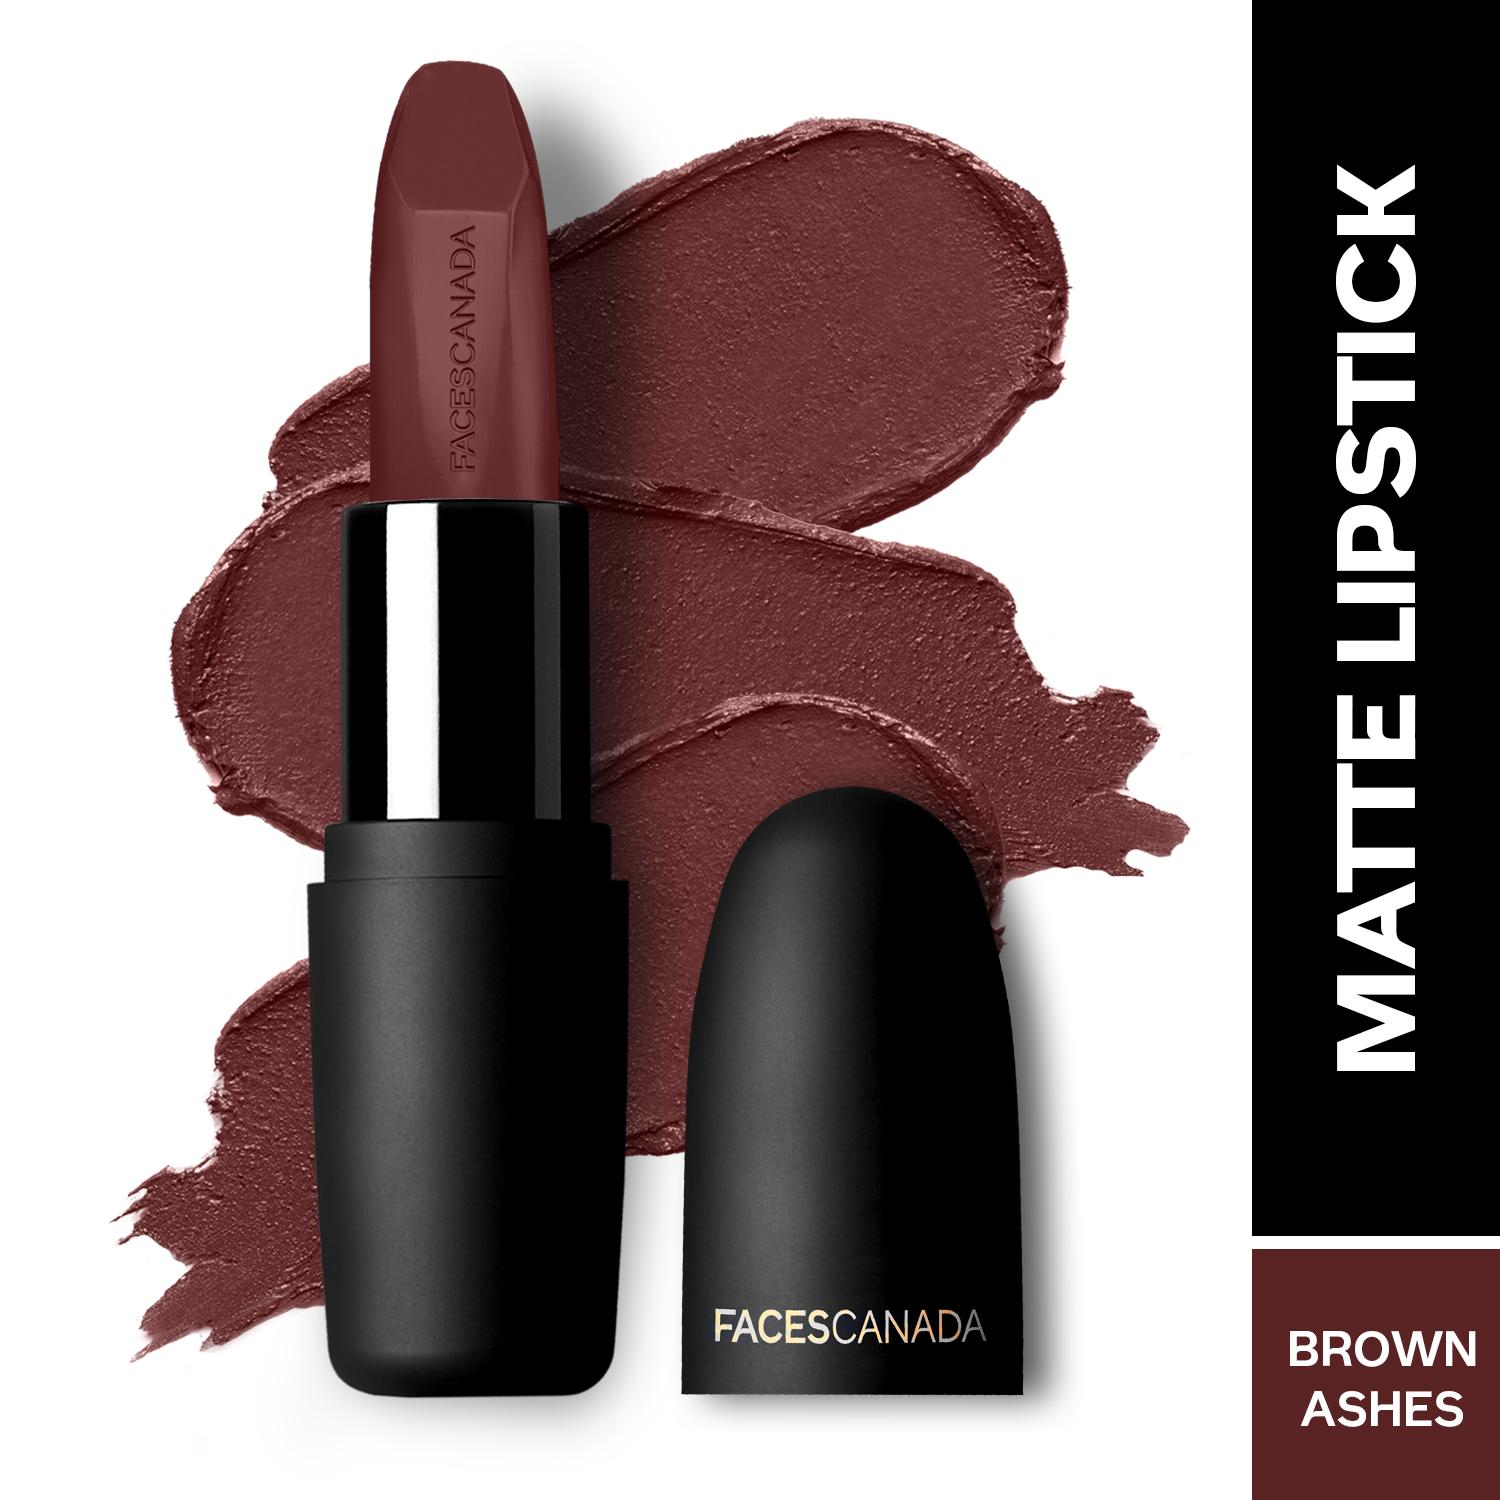 Faces Canada | Faces Canada Weightless Matte Lipstick, Pigmented and Hydrated Lips - Brown Ashes 25 (4.5 g)